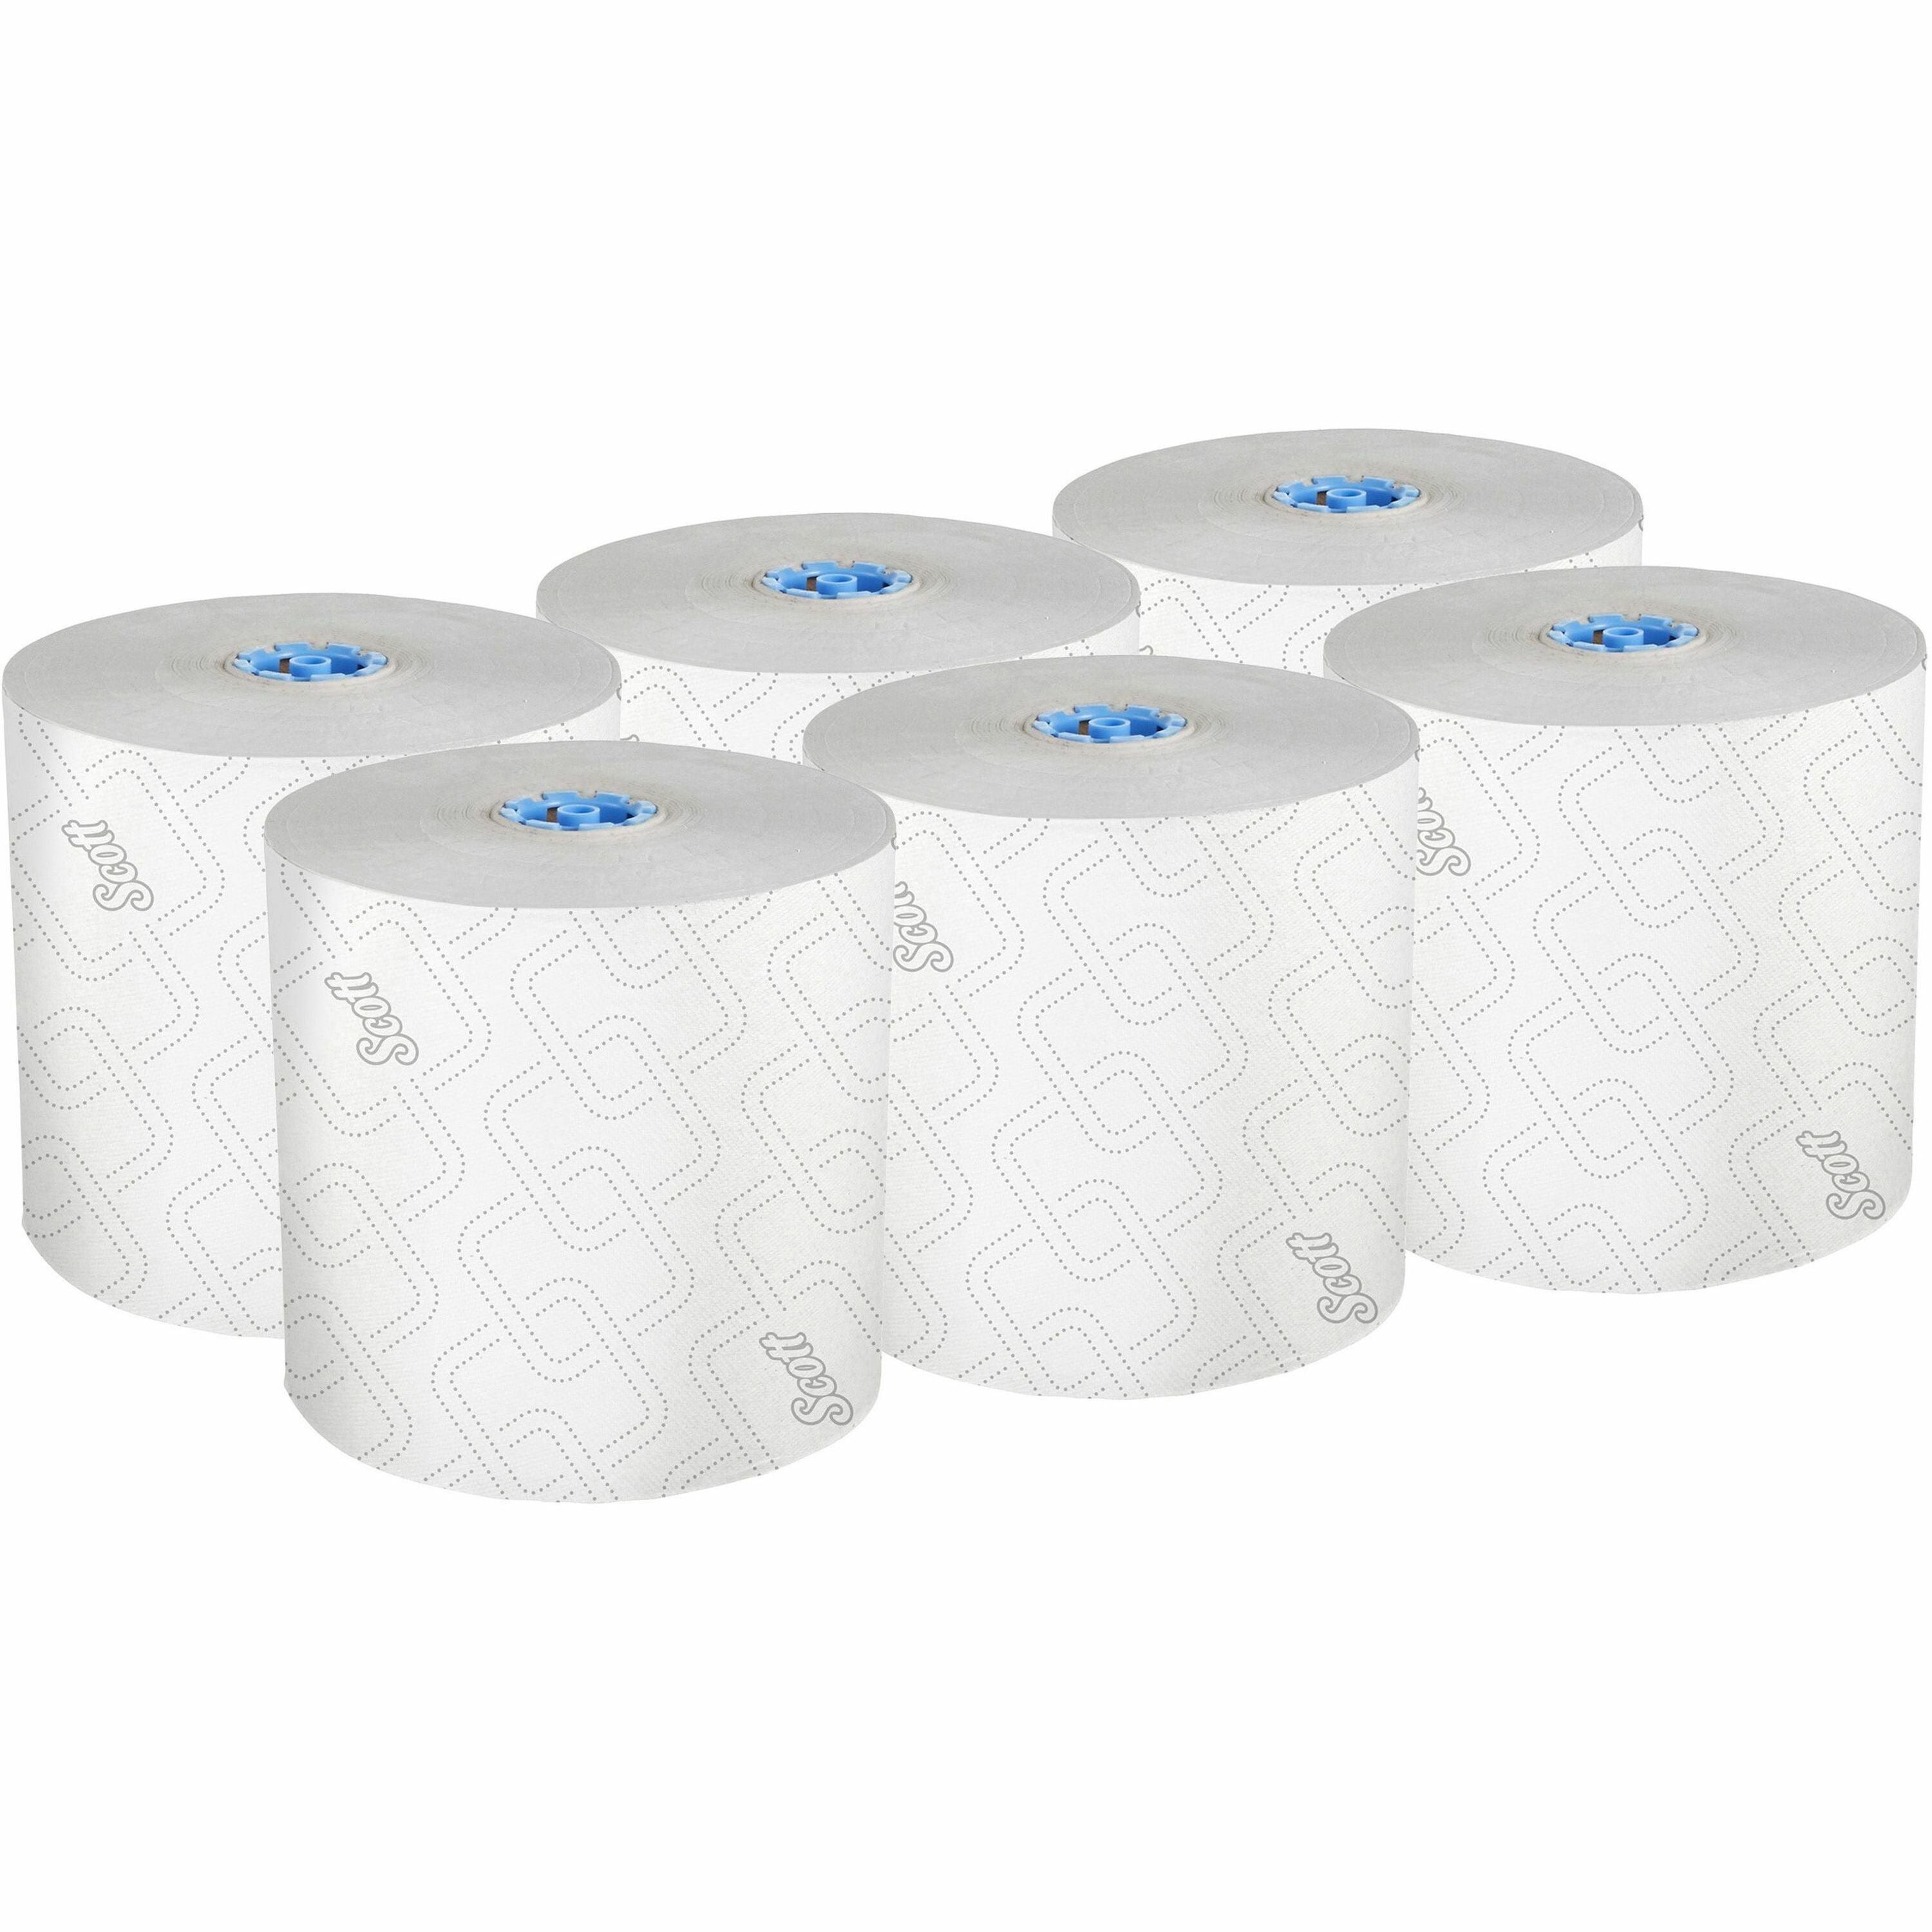 scott-pro-high-capacity-hard-roll-towels-with-elevated-design-&-absorbency-pockets-750-x-700-ft-175-core-white-paper-quick-drying-absorbent-hygienic-for-hand-washroom-breakroom-restroom-guest-employee-6-carton_kcc53925 - 1